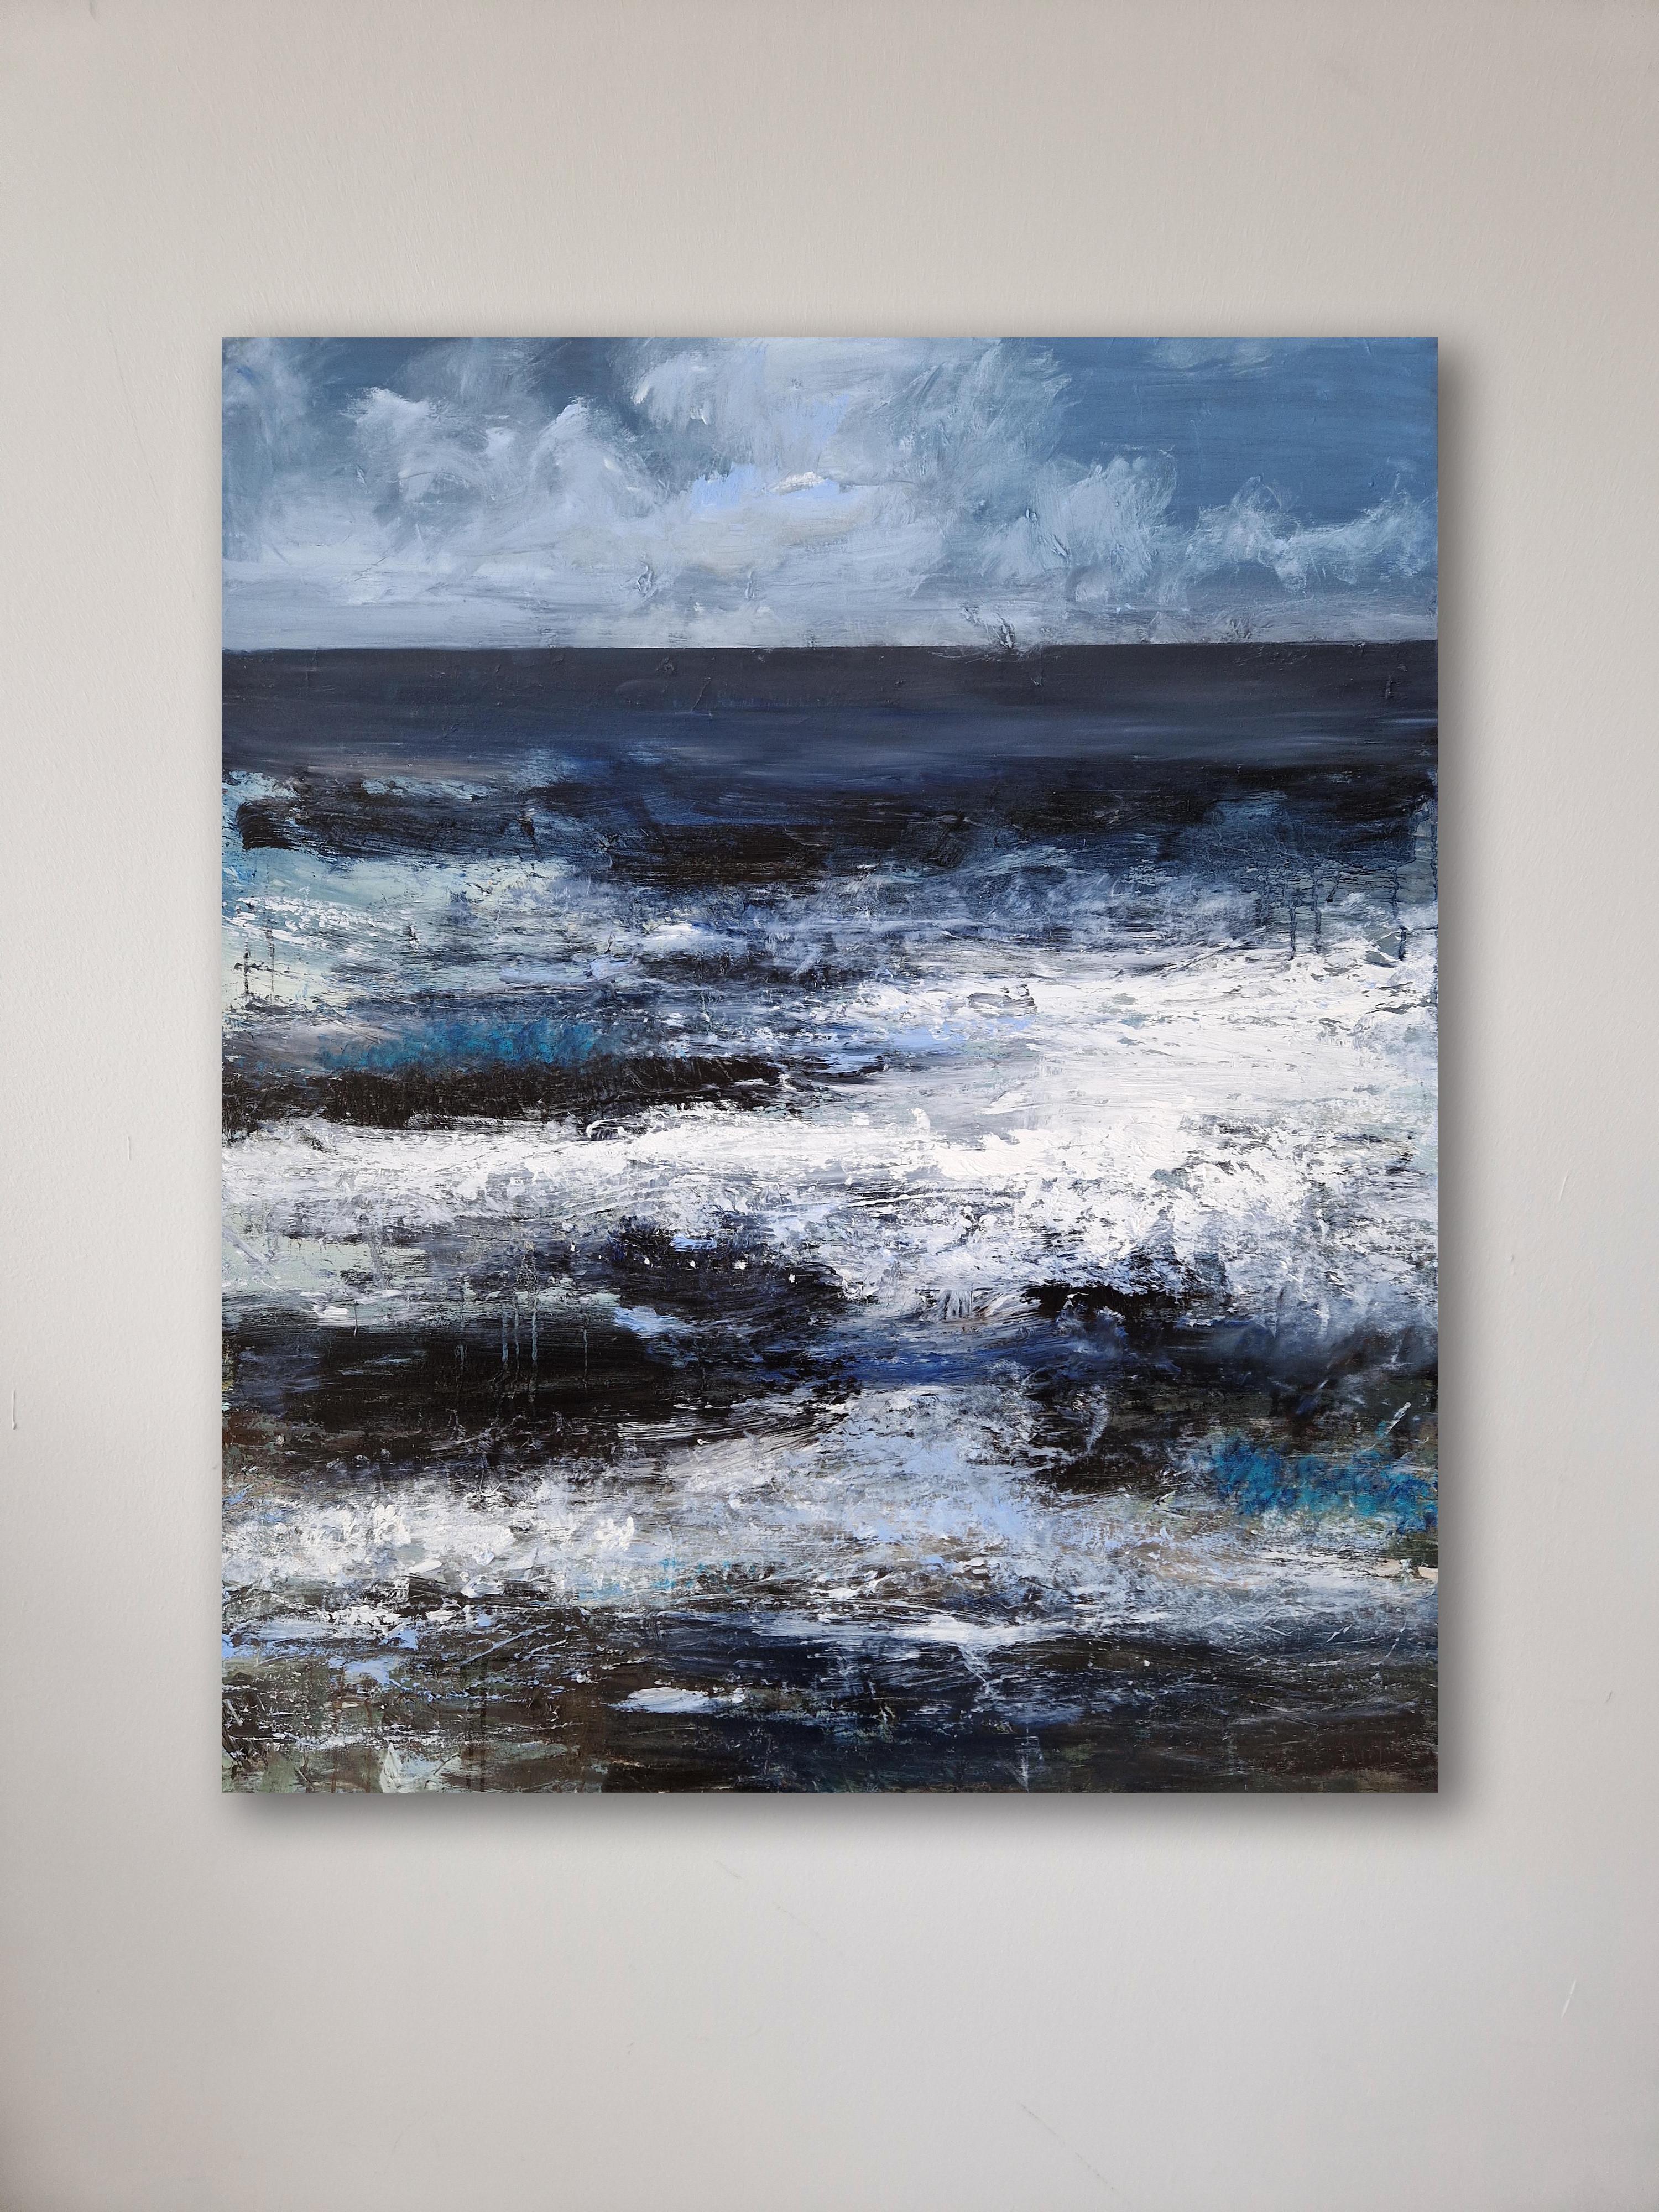 Sea Spray and Salt in the Air VI - Contemporary Painting by Hannah Ivory Baker